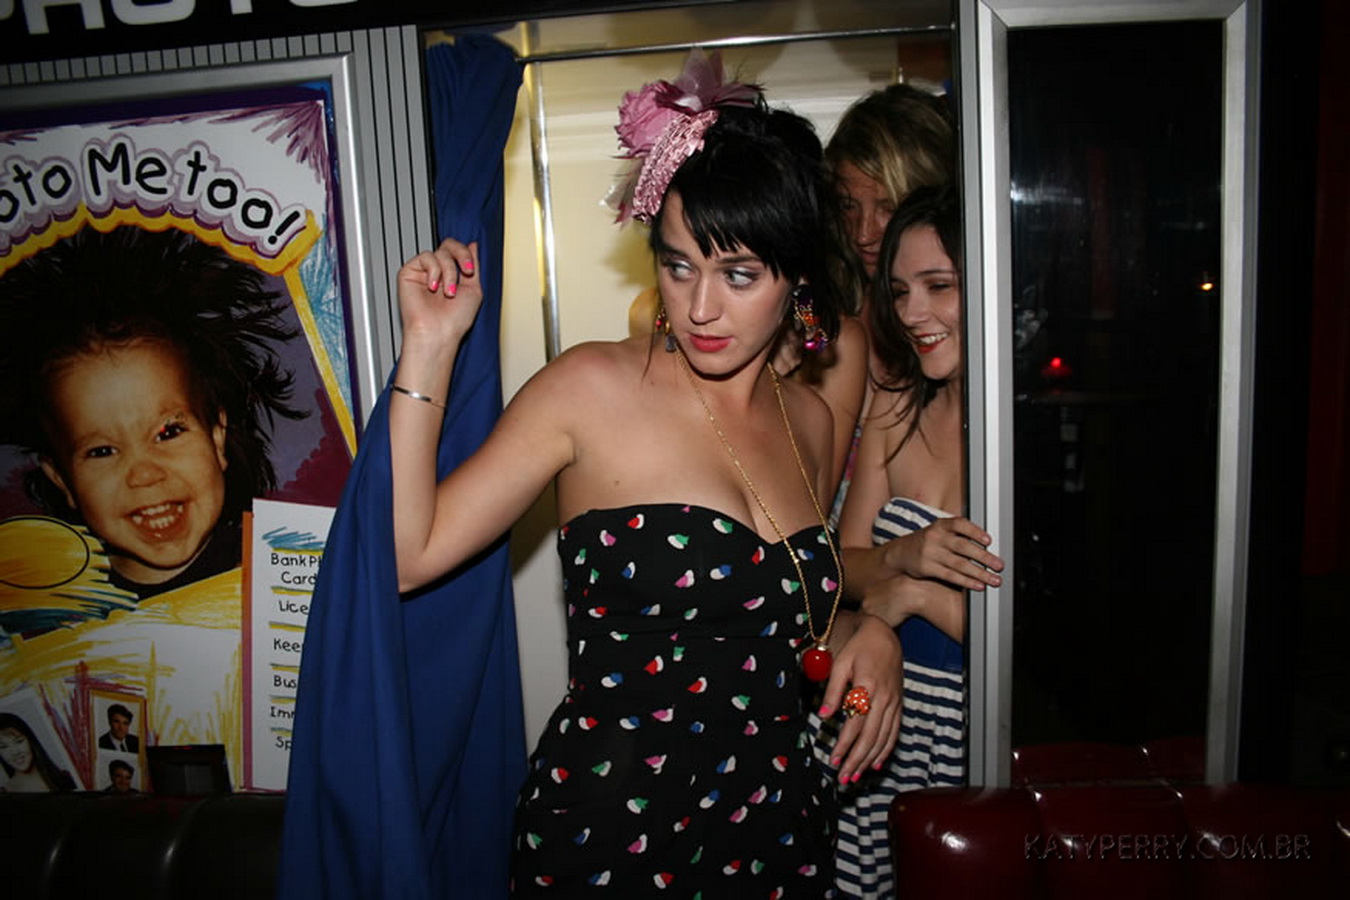 Katy_Perry_bobsslip_drunk_cleavage_downblouse_upskirt_nipslip_at_her_birthday_2007_party_99x_HQ_98.jpg